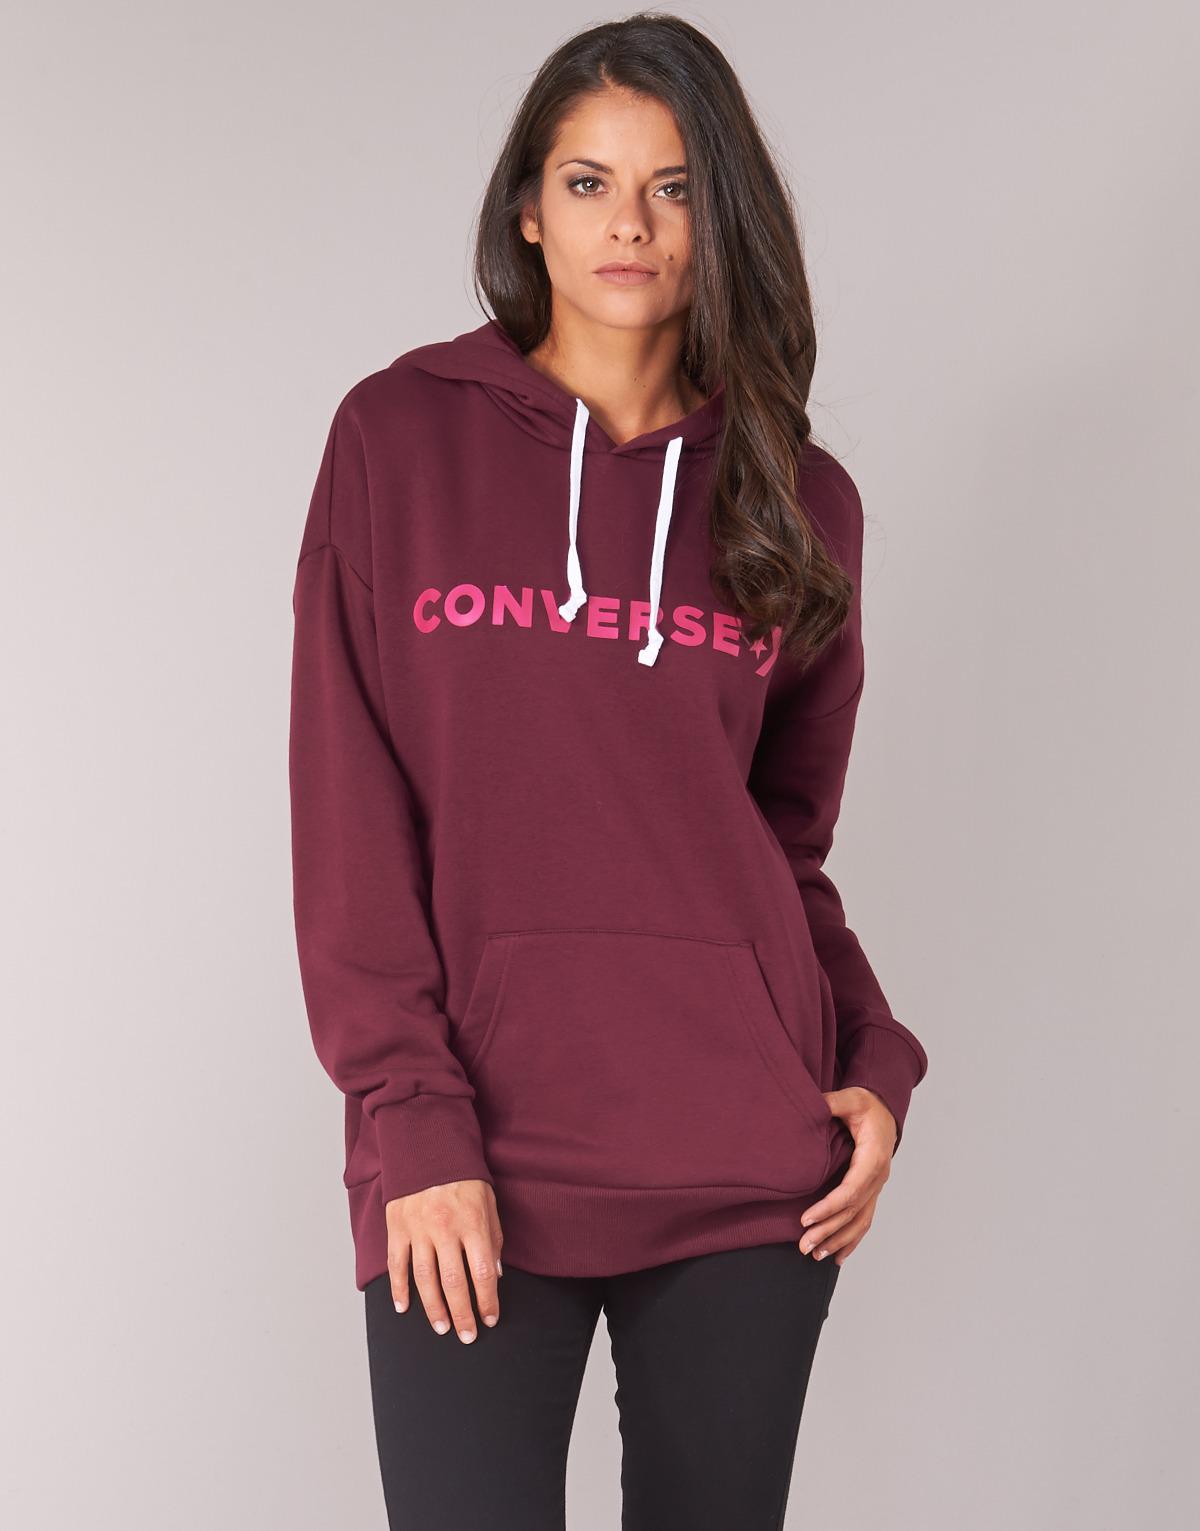 converse tracksuit womens